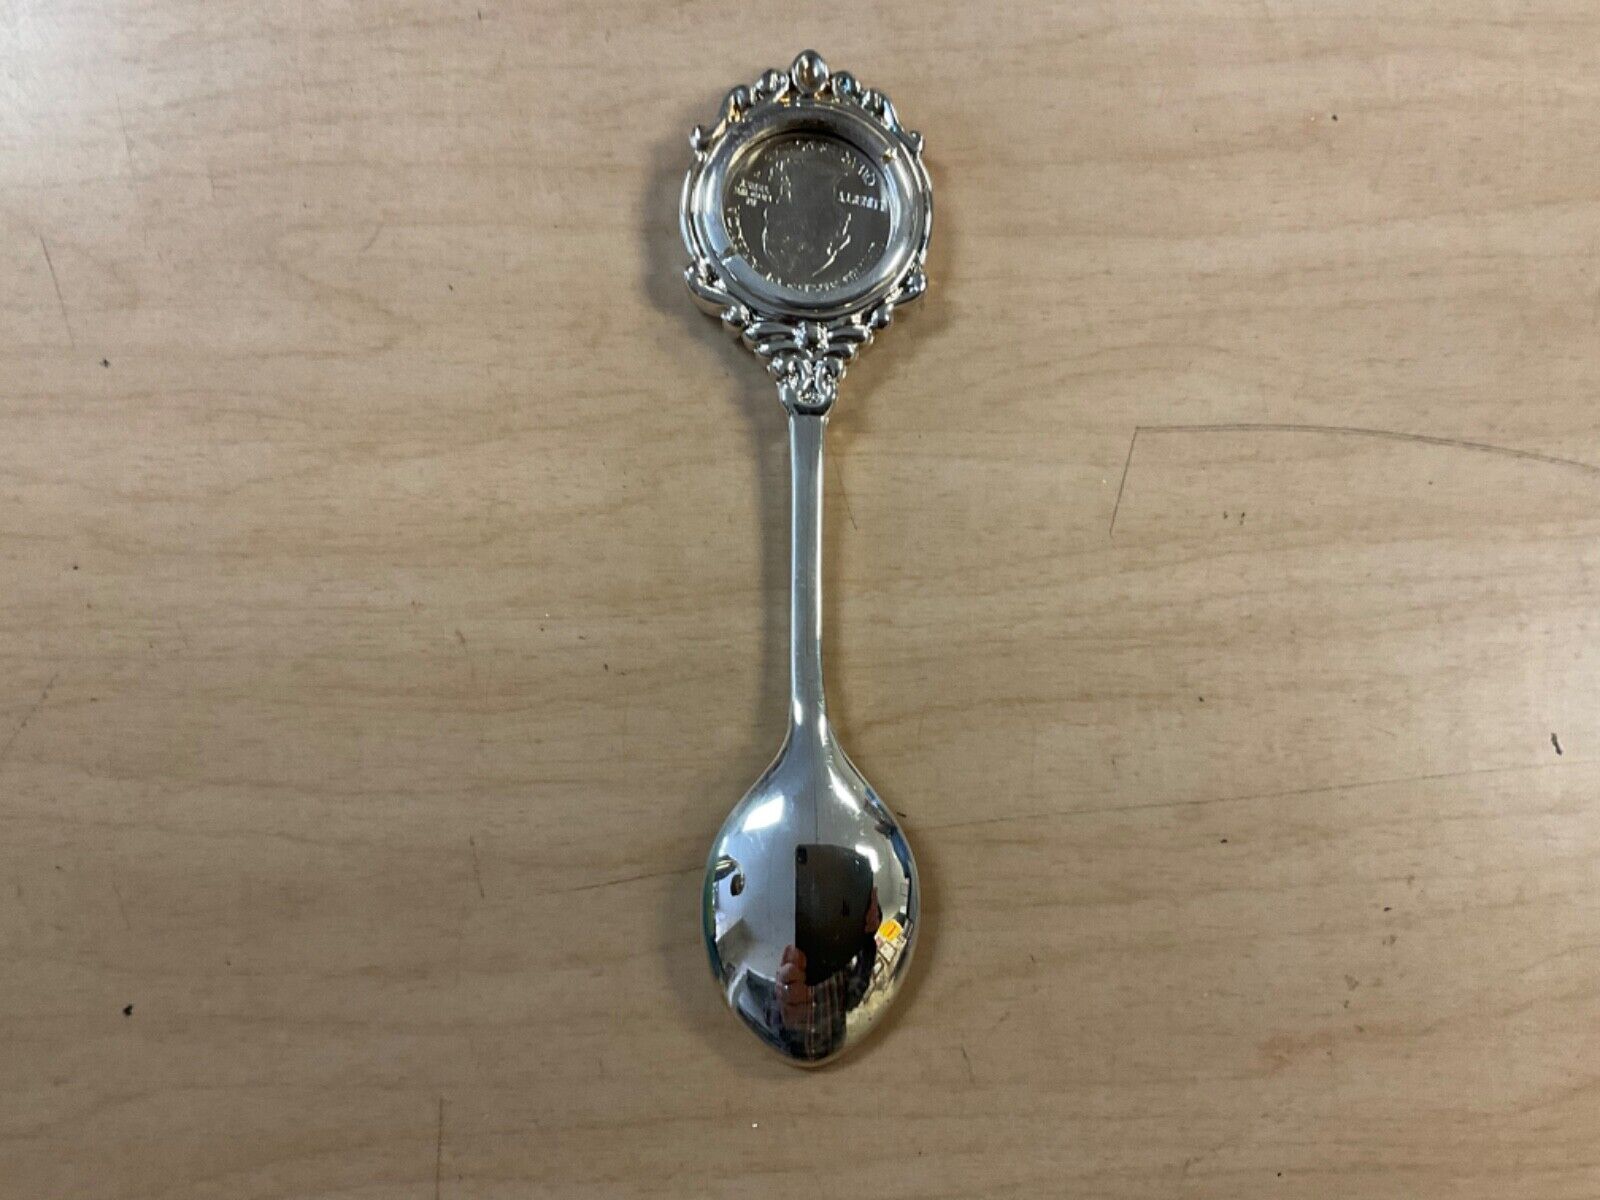 Vintage Souvenir Collector Spoon with Uncirculated Nevada State Quarter Unknown